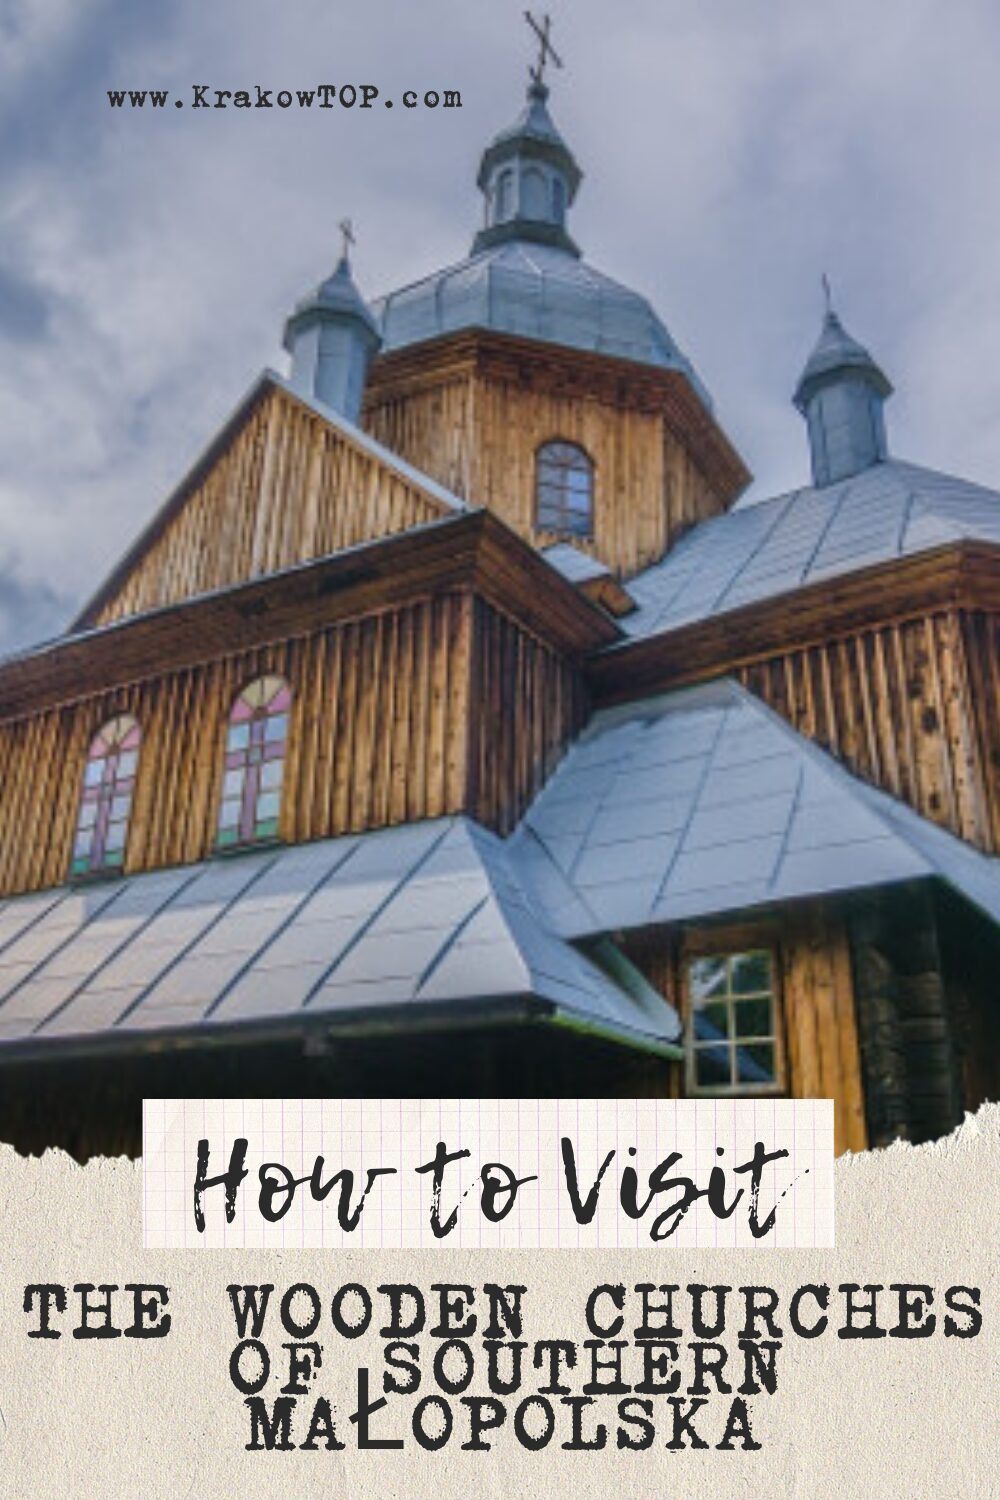 Guide to the Wooden Churches of Southern Małopolska